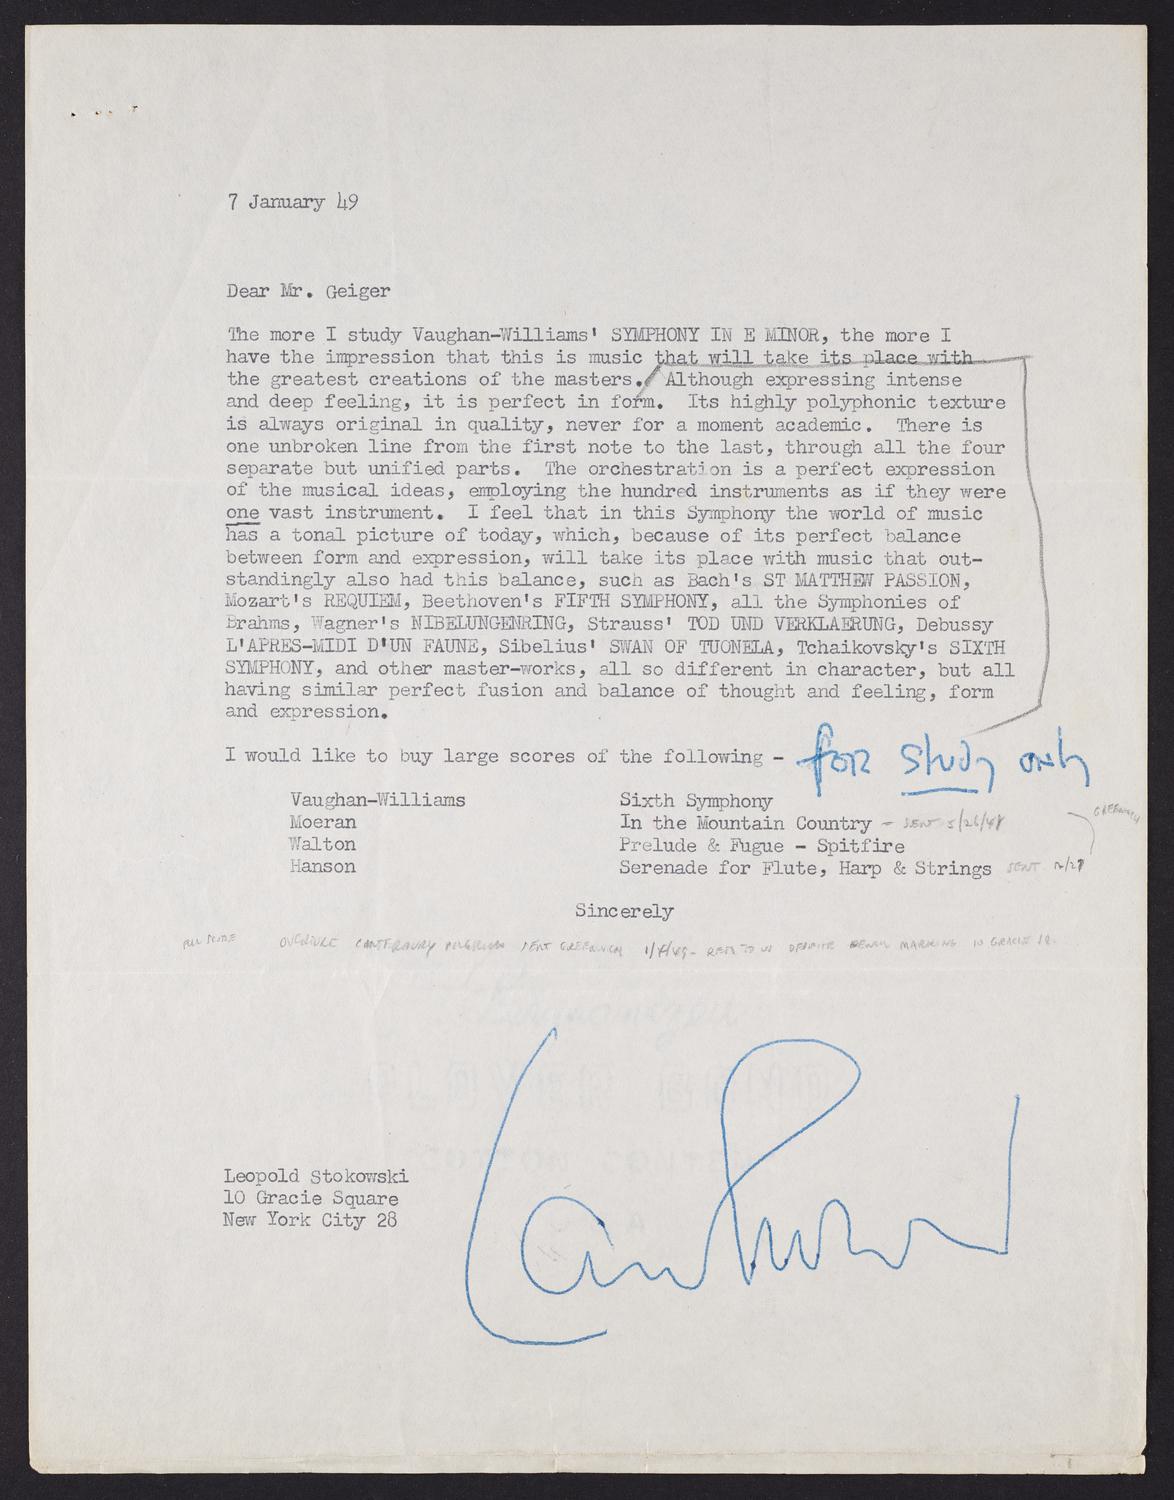 Correspondence from Leopold Stokowski to Robert Geiger, page 1 of 6